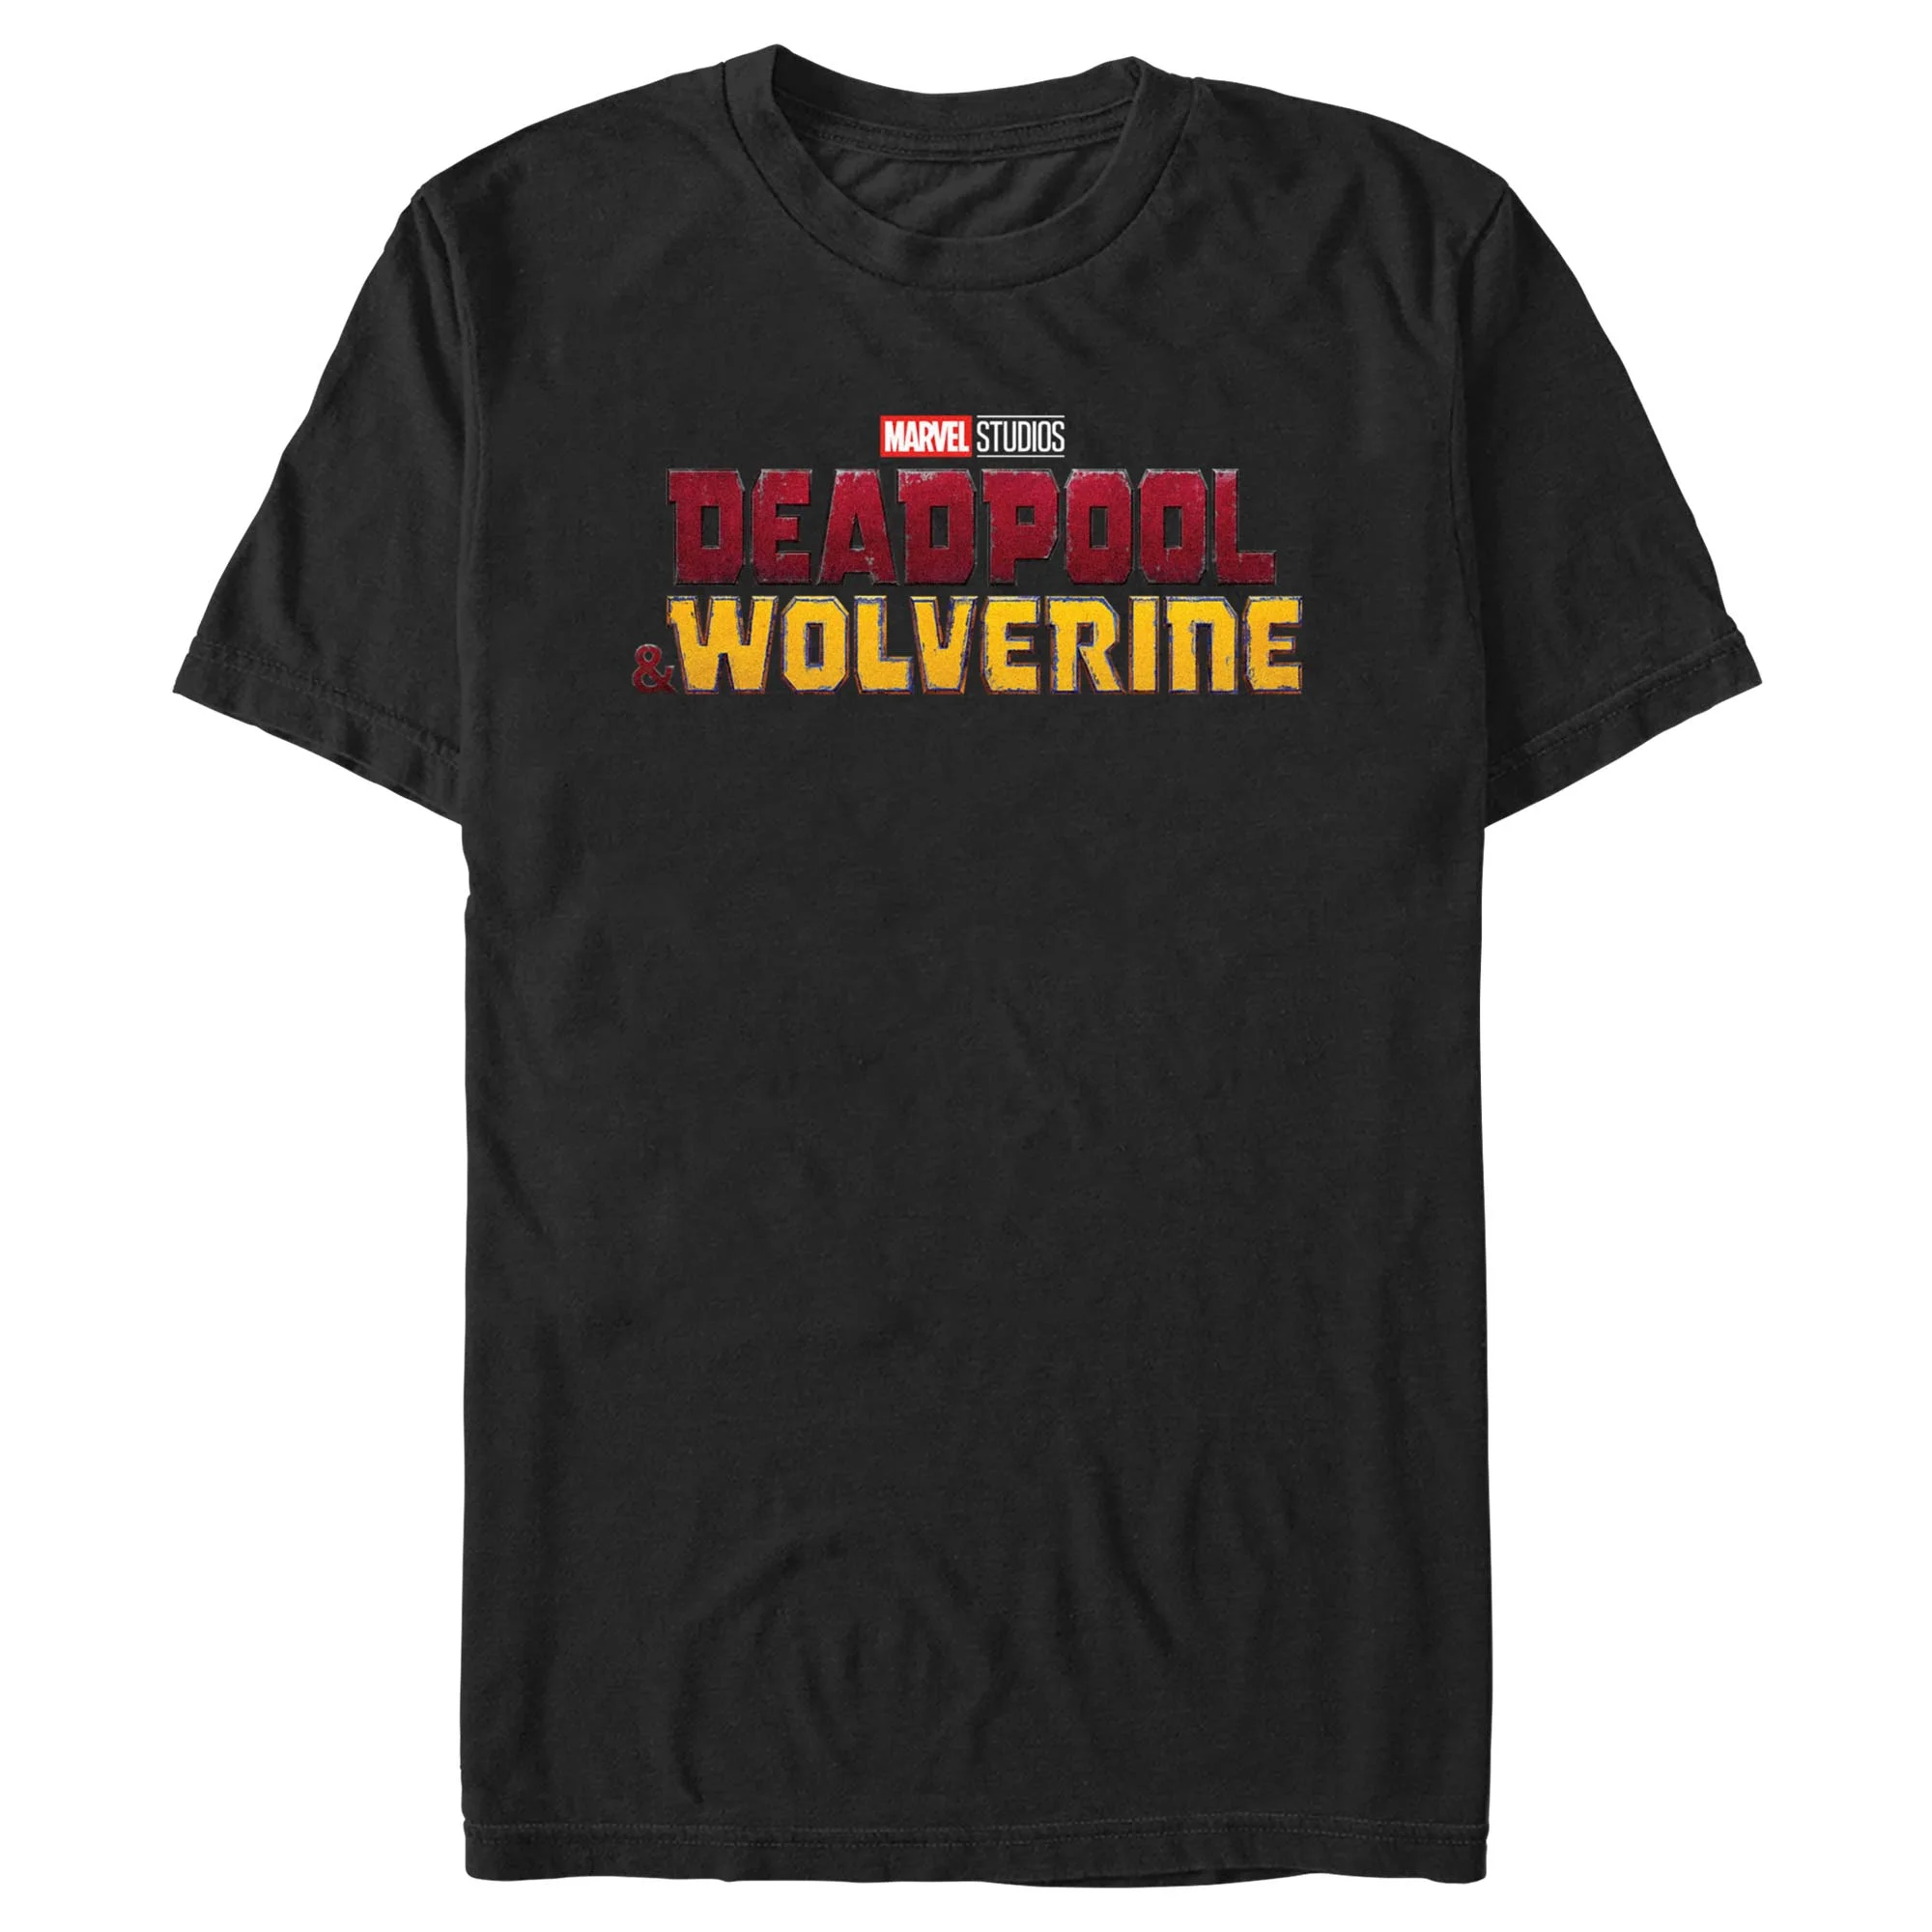 Deadpool and Wolverine logo on graphic tee.